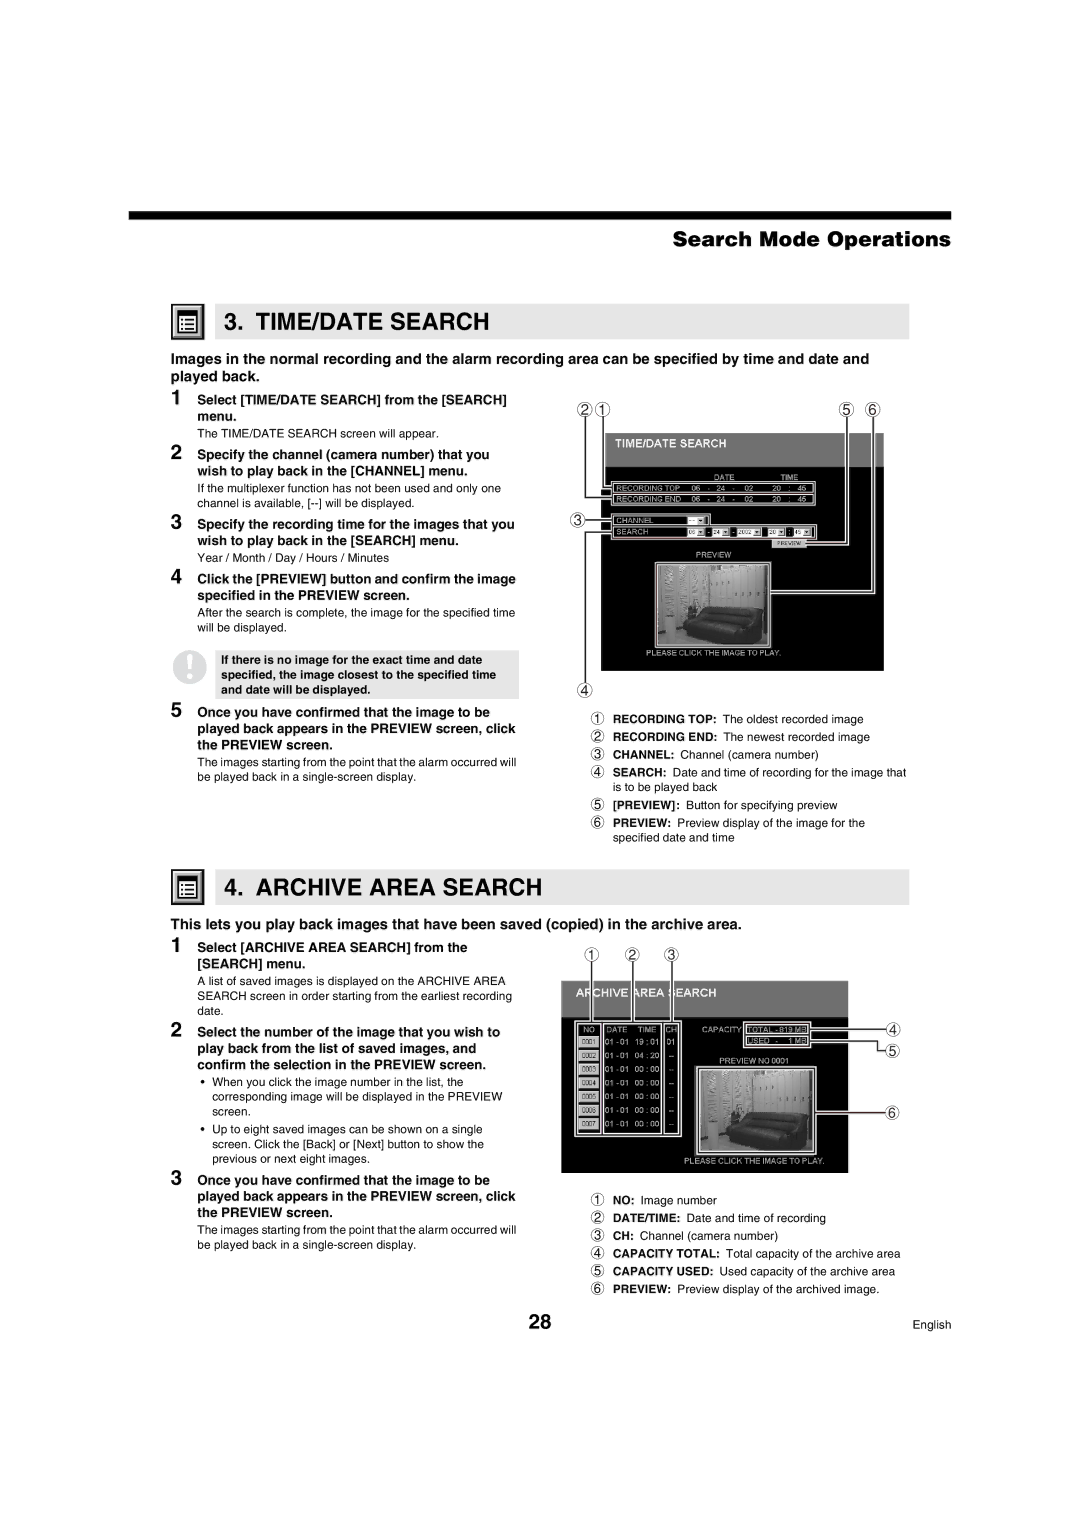 Sanyo DSR-3009 manual Archive Area Search, Search Mode Operations, Select TIME/DATE Search from the Search menu 